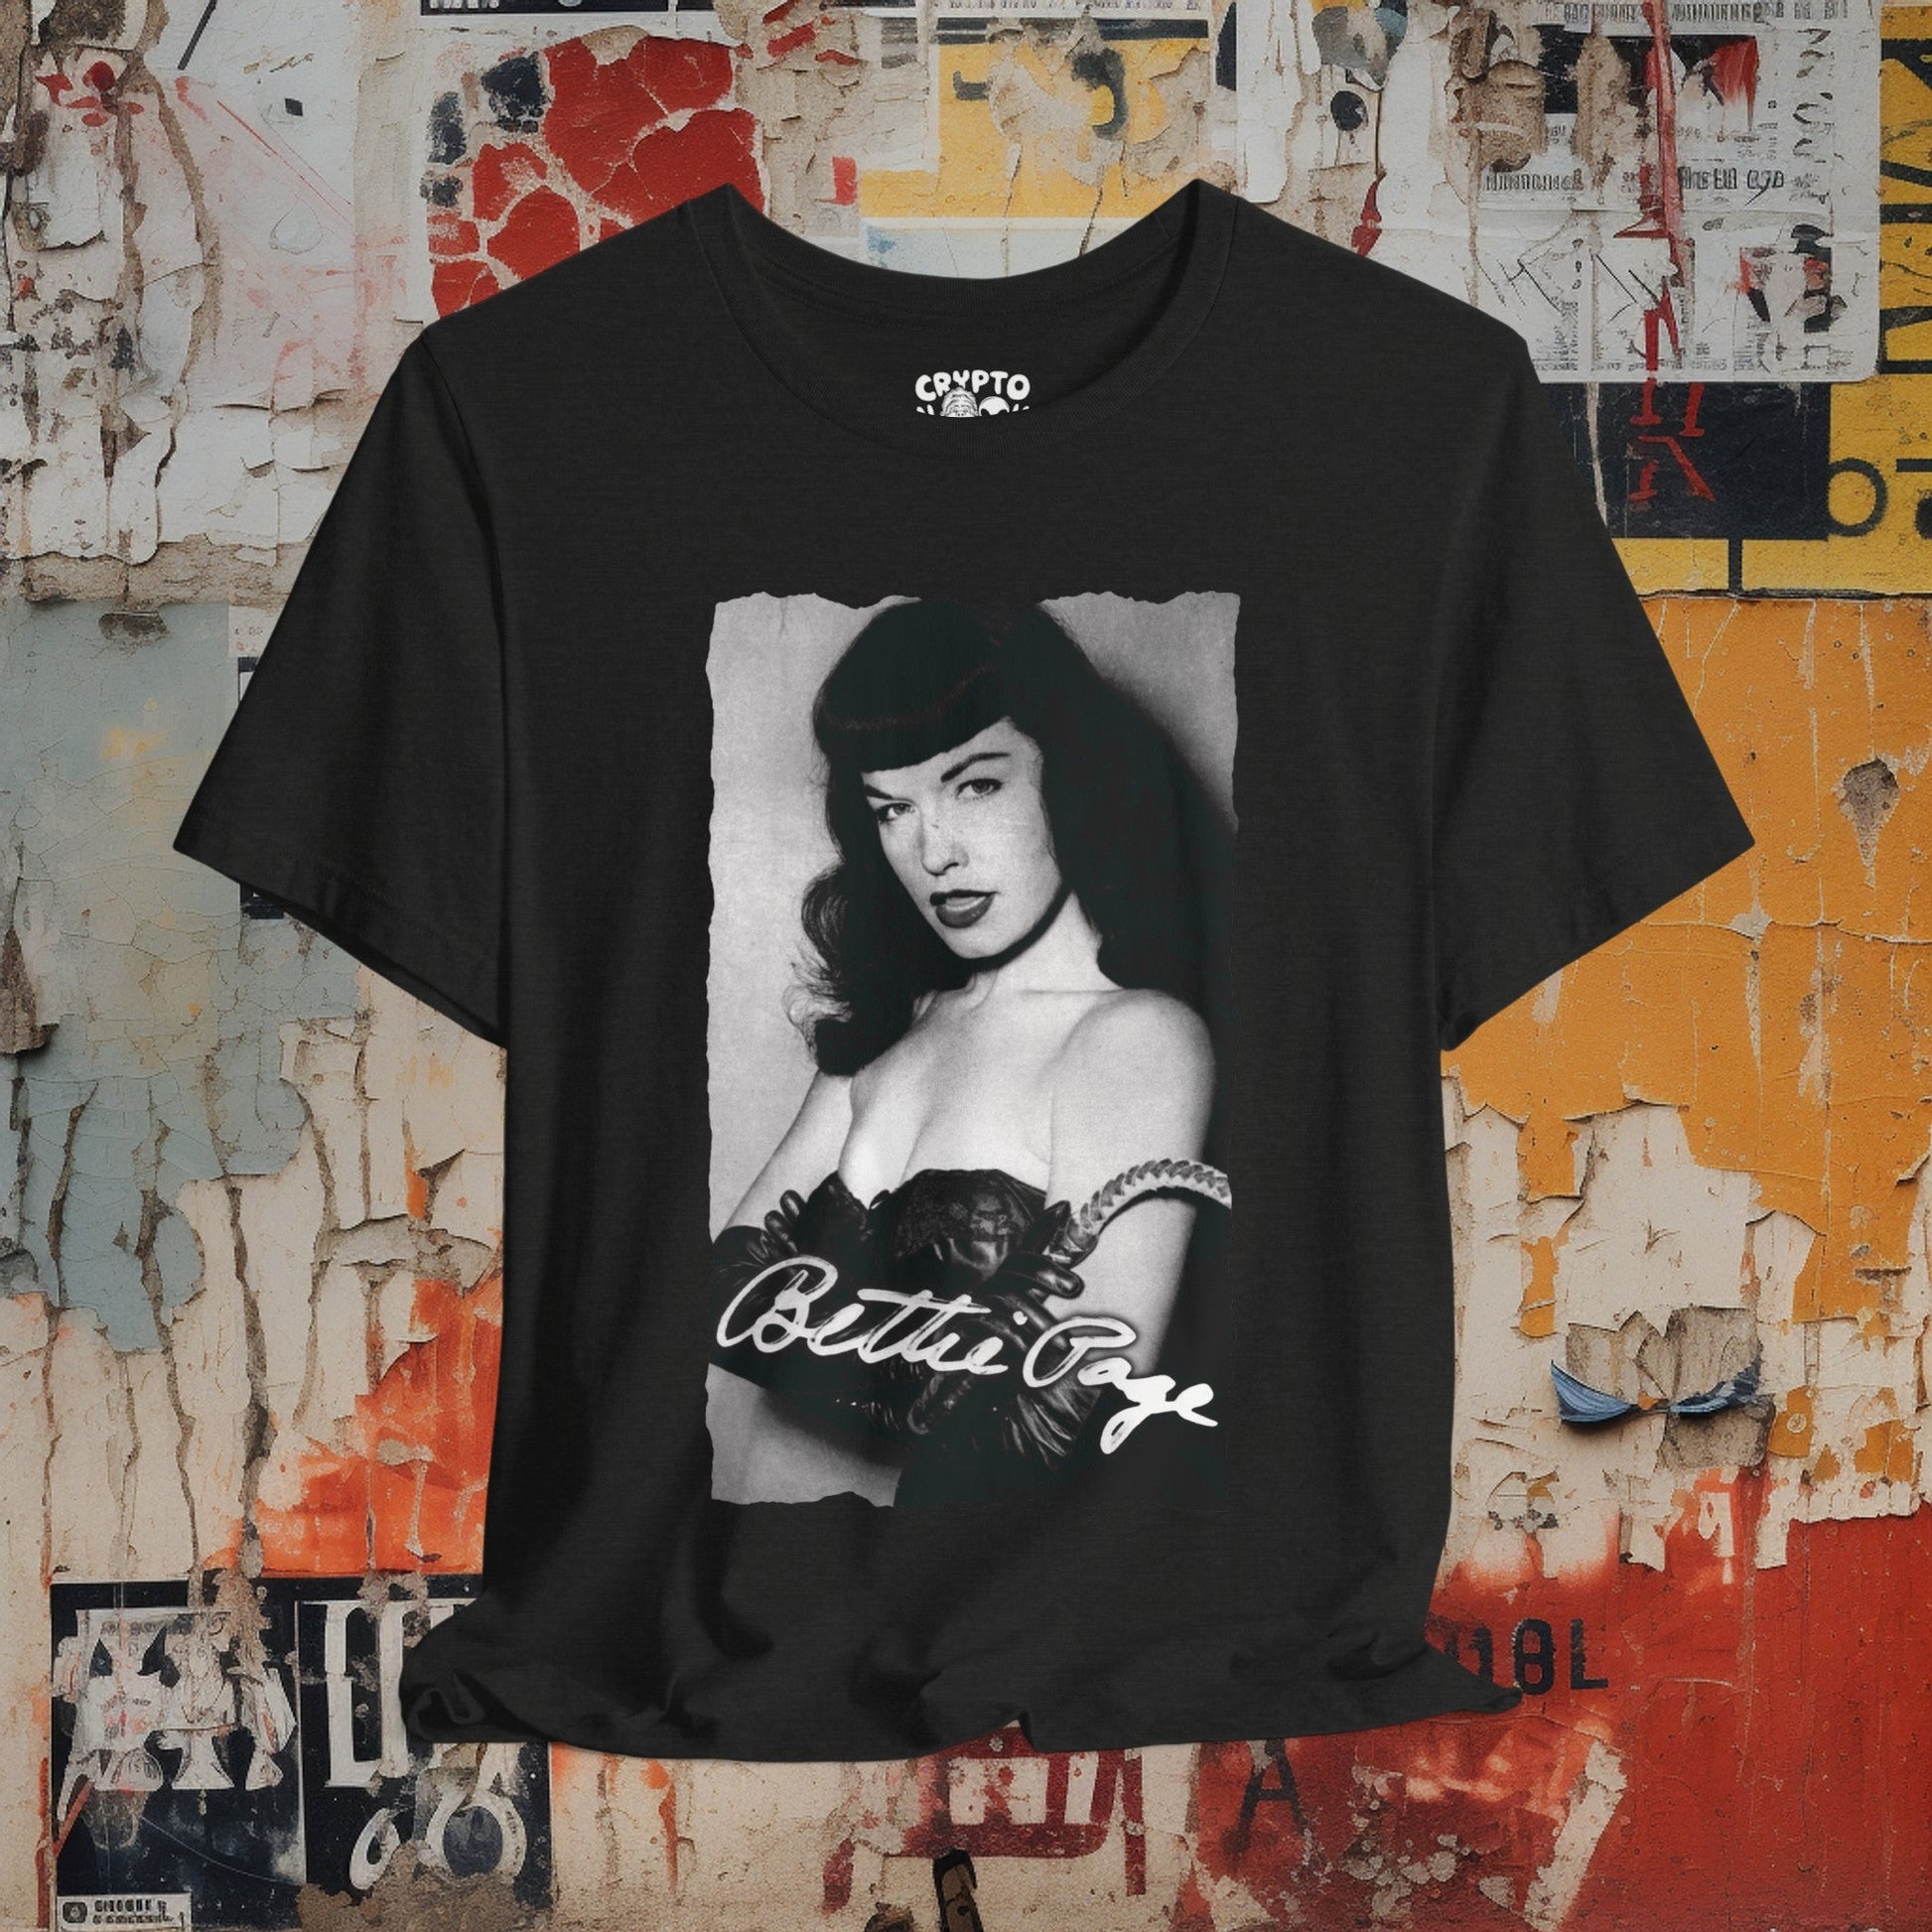 T-Shirt - Bettie Page | Bella + Canvas Unisex T-shirt from Crypto Zoo Tees